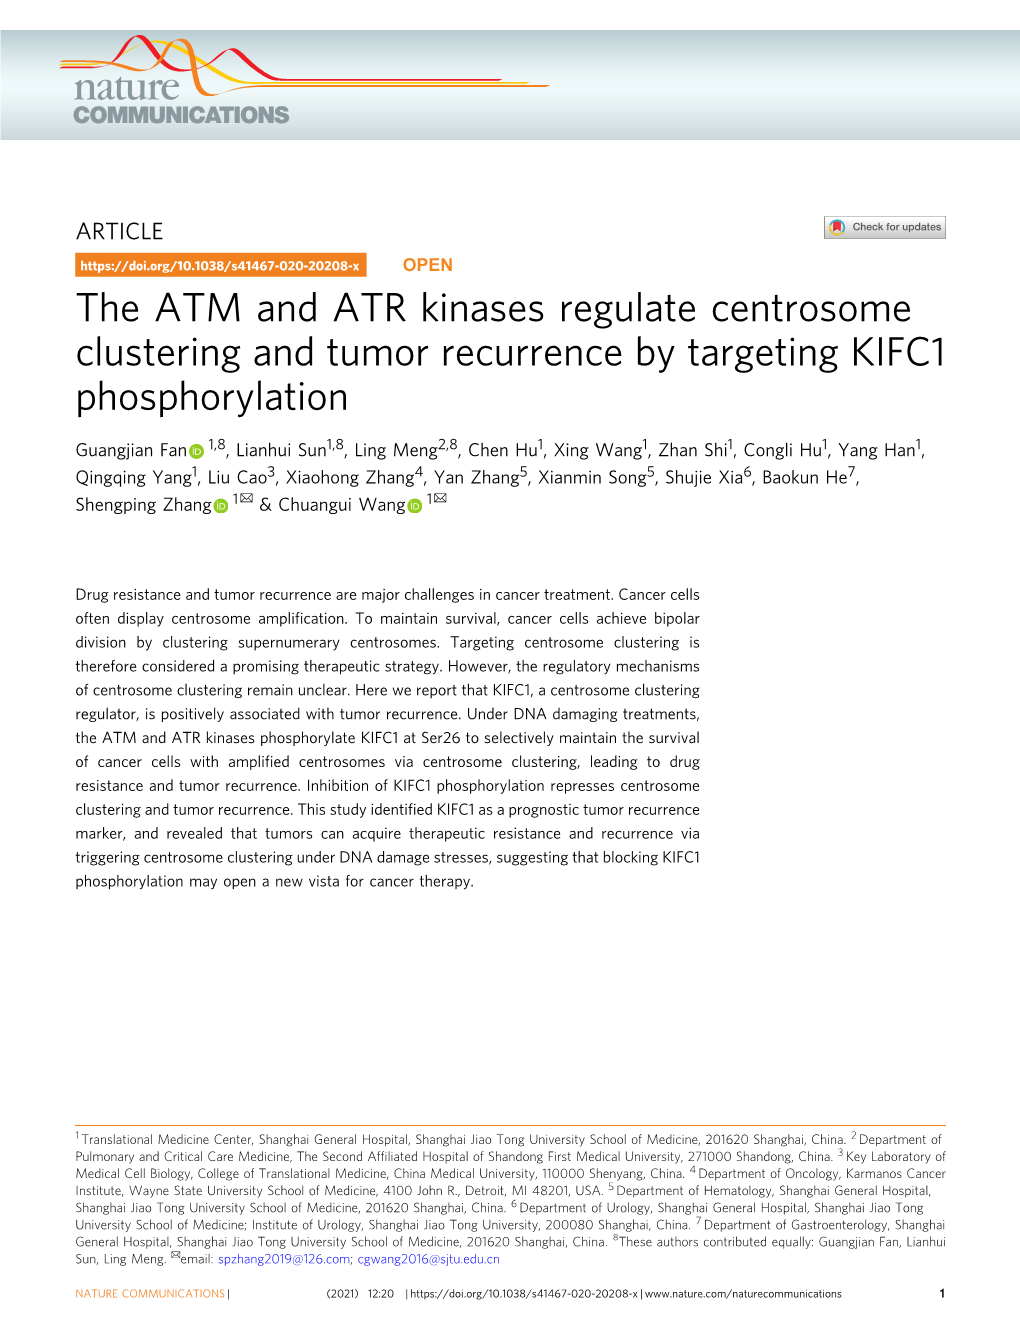 The ATM and ATR Kinases Regulate Centrosome Clustering and Tumor Recurrence by Targeting KIFC1 Phosphorylation